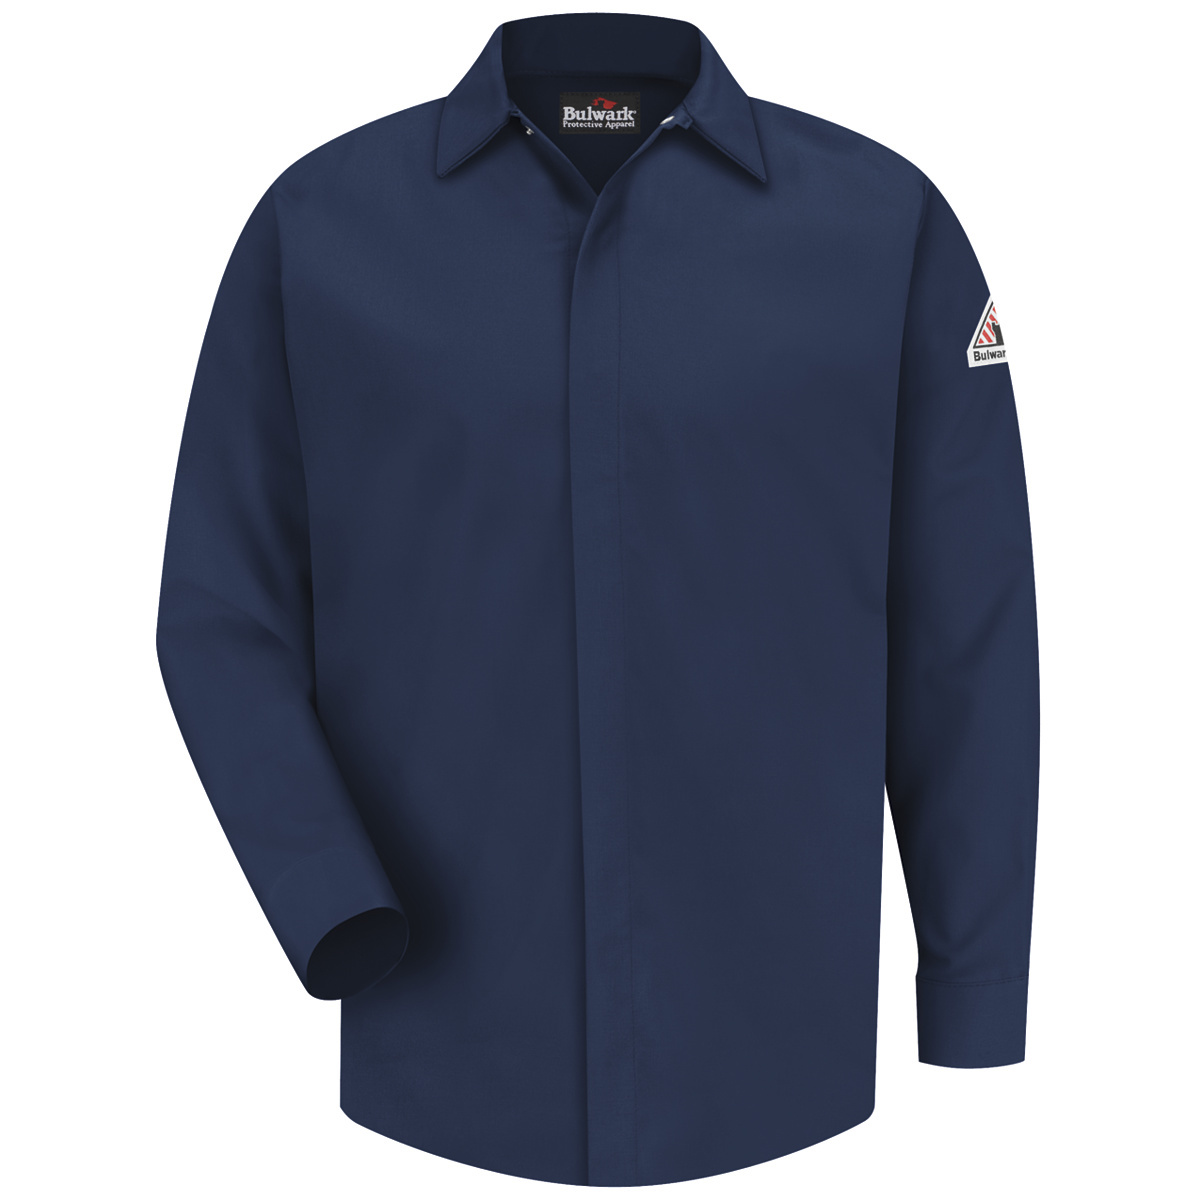 Bulwark® 2X Regular Navy Blue CoolTouch®/Modacrylic/Lyocell/Aramid Flame Resistant Work Shirt With Gripper Front Closure